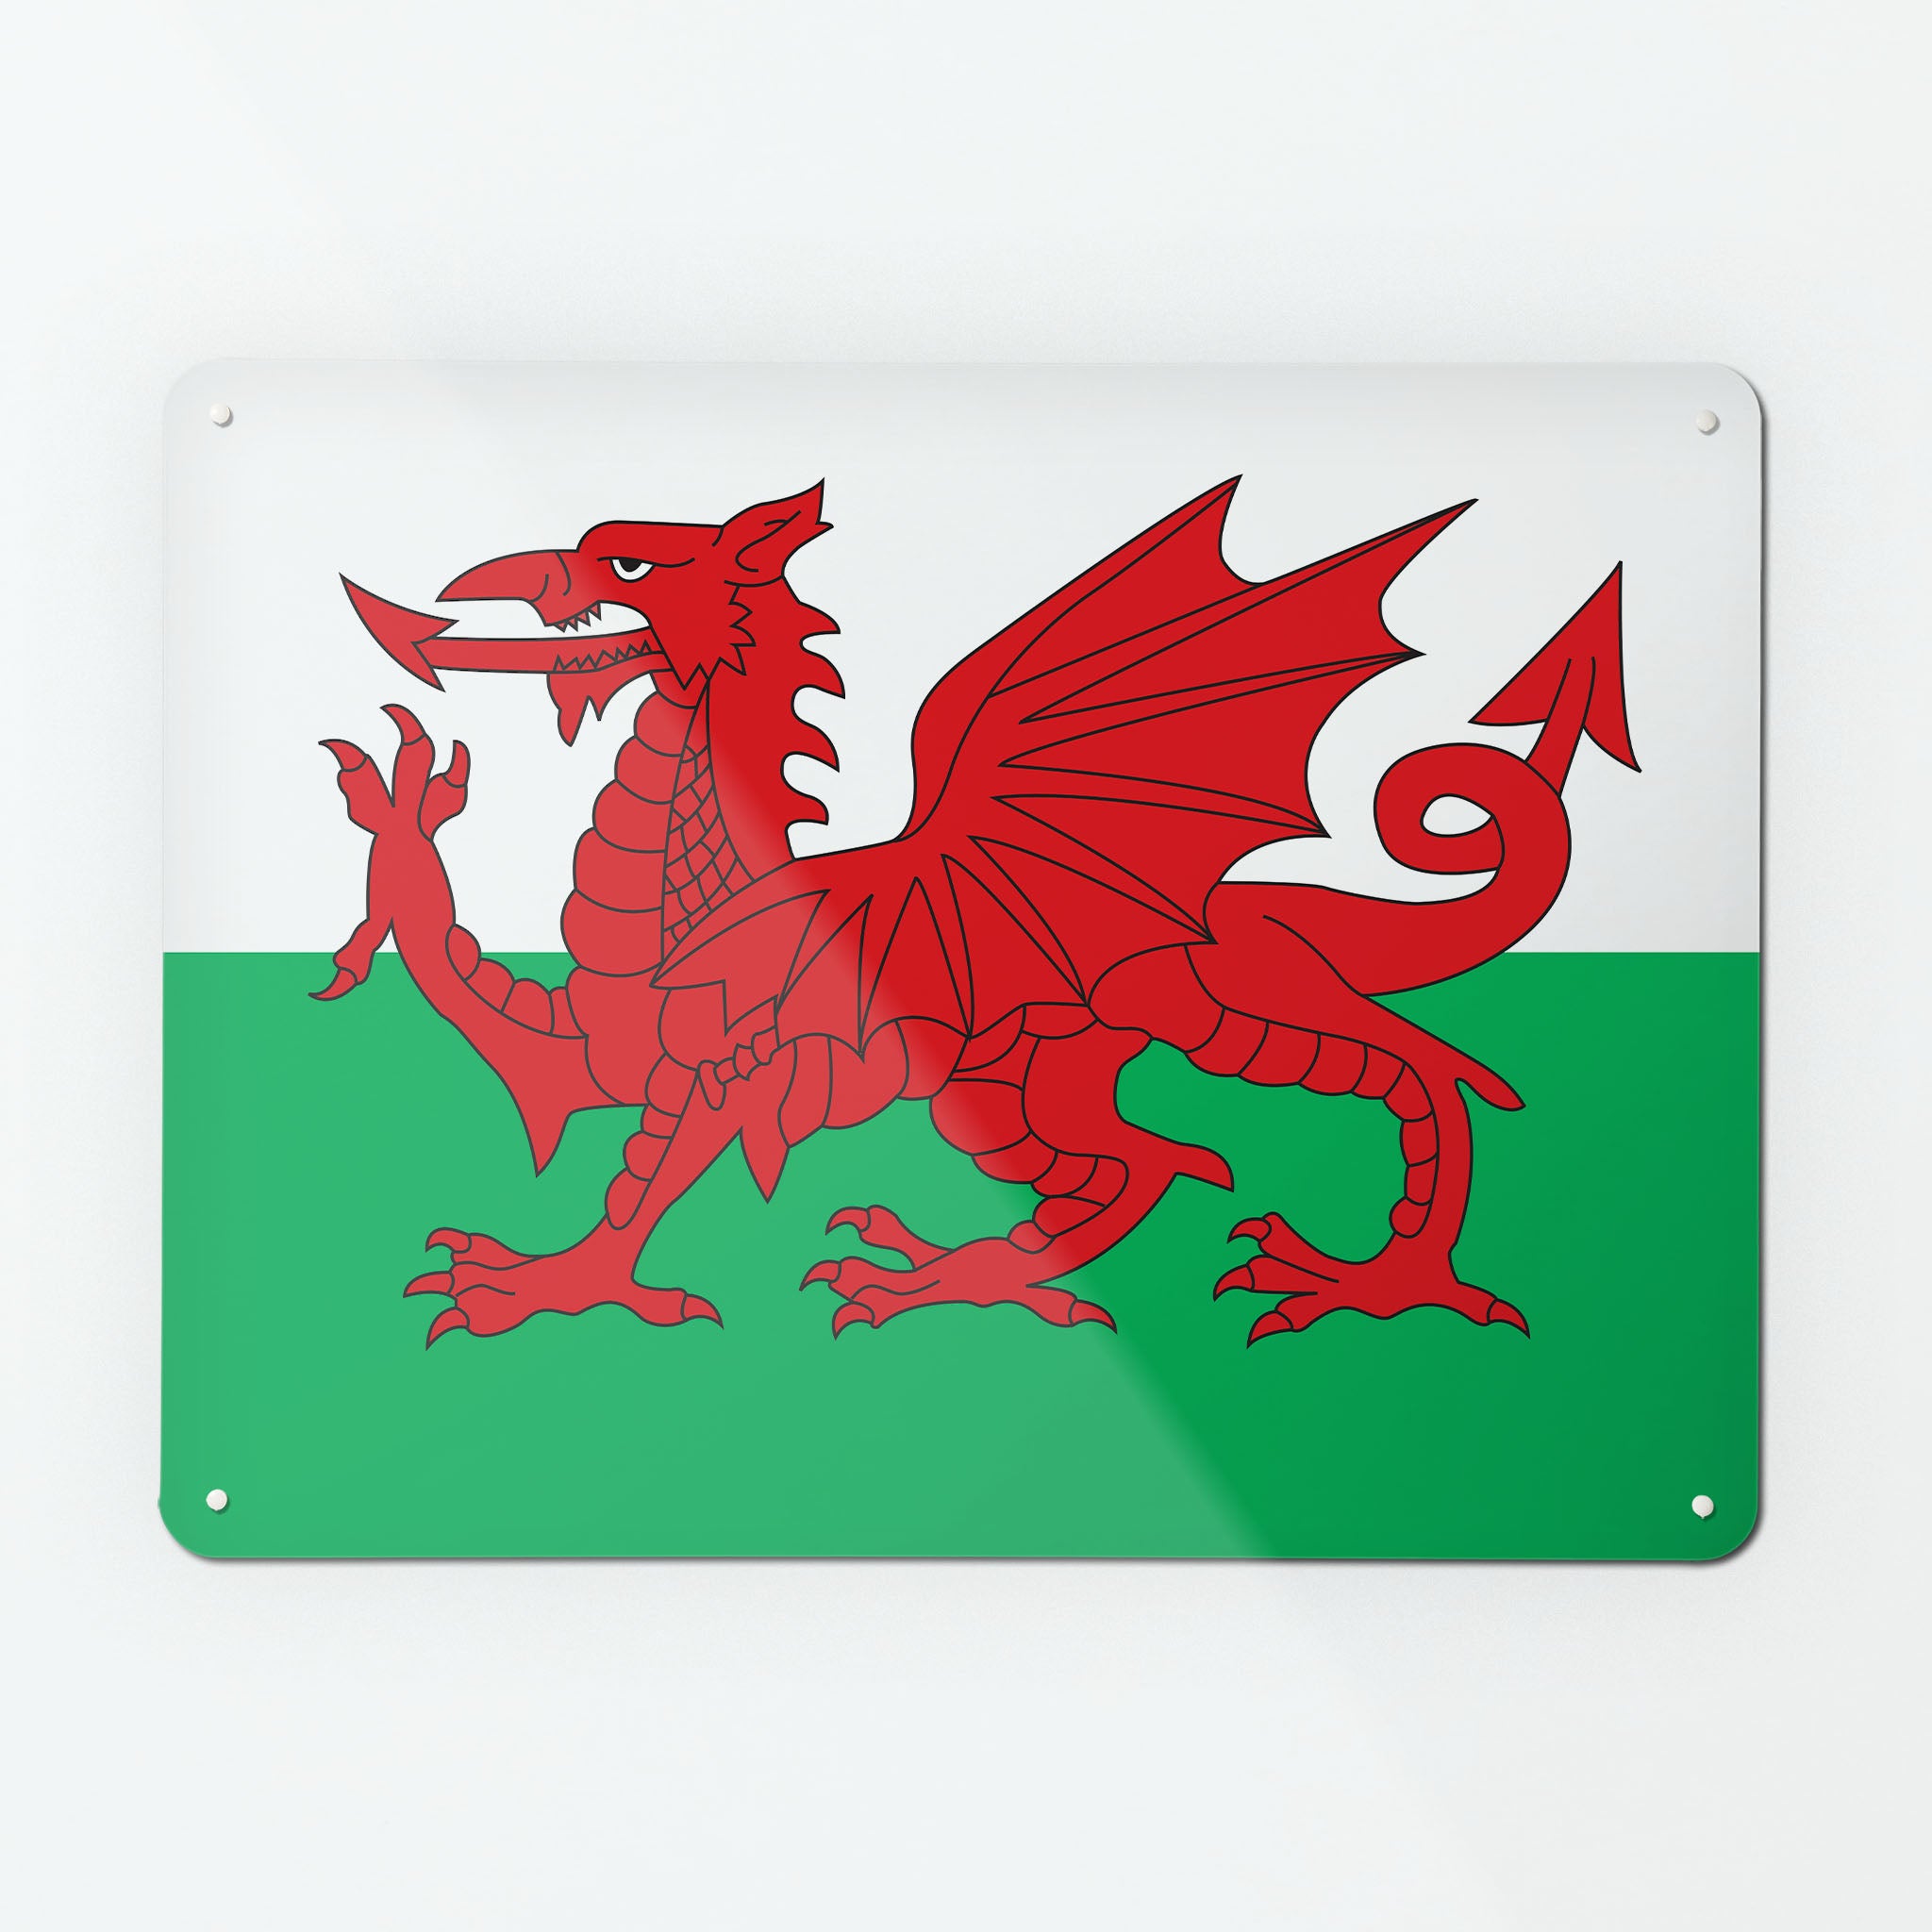 A large magnetic notice board by Beyond the Fridge with a Welsh flag design